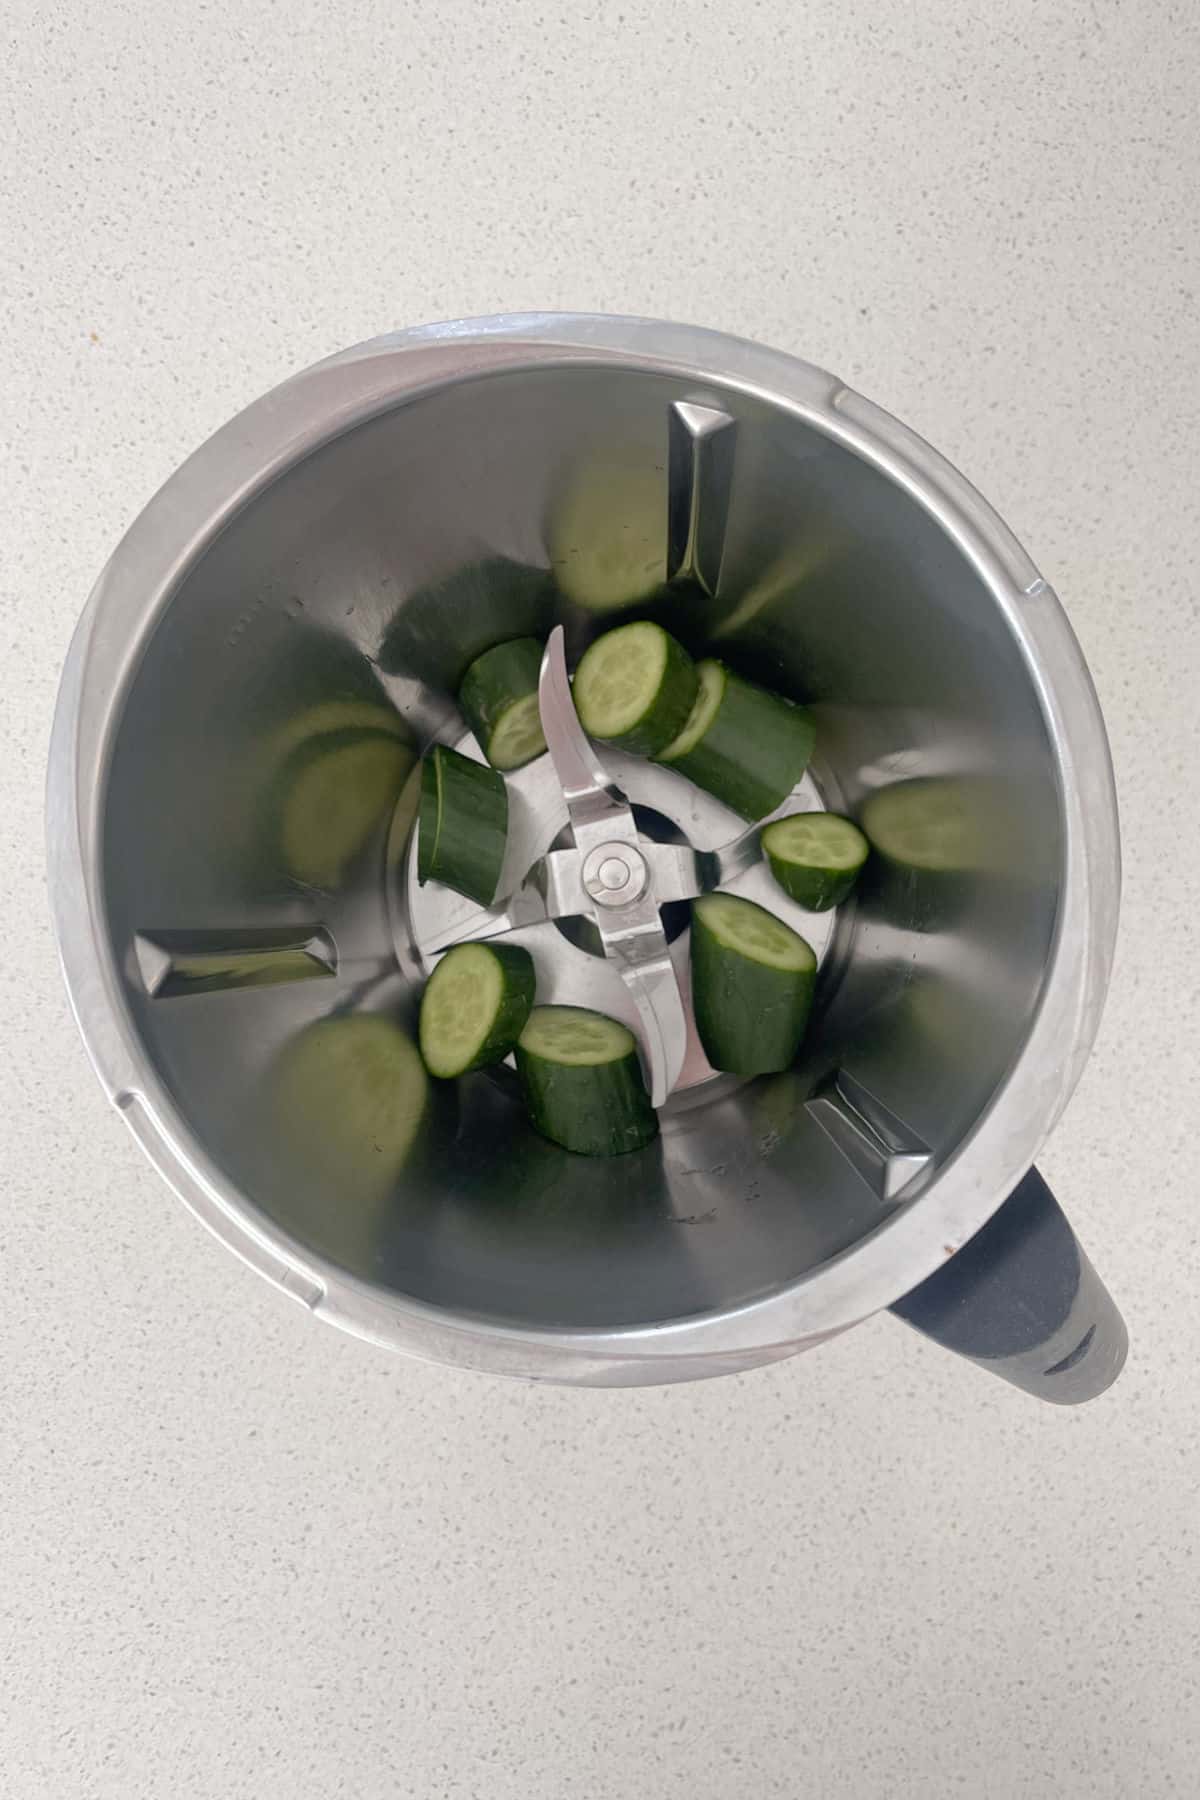 Chopped cucumber pieces in a thermomix bowl.